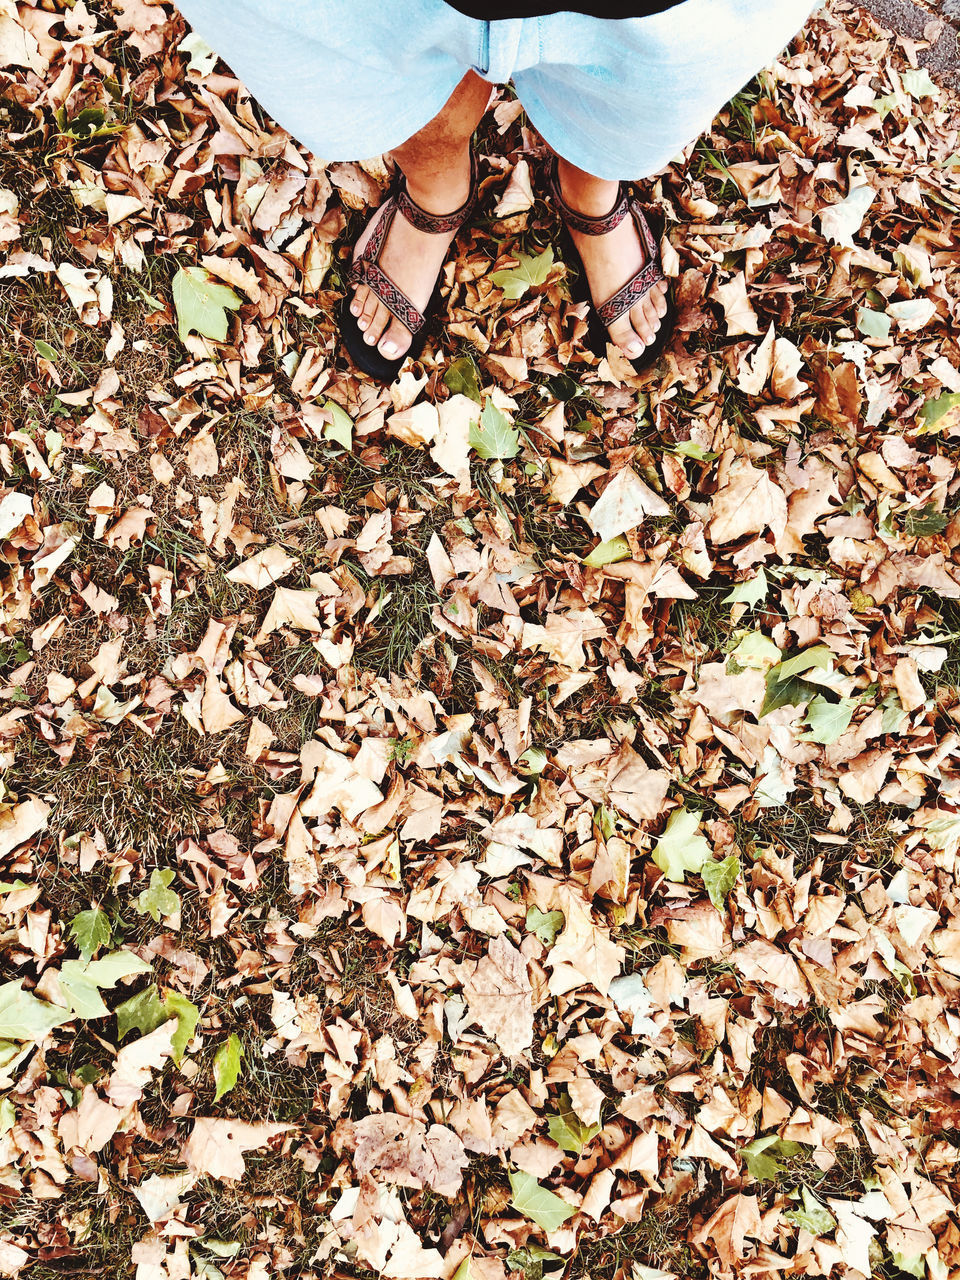 LOW SECTION OF PERSON STANDING BY DRY LEAVES ON LAND